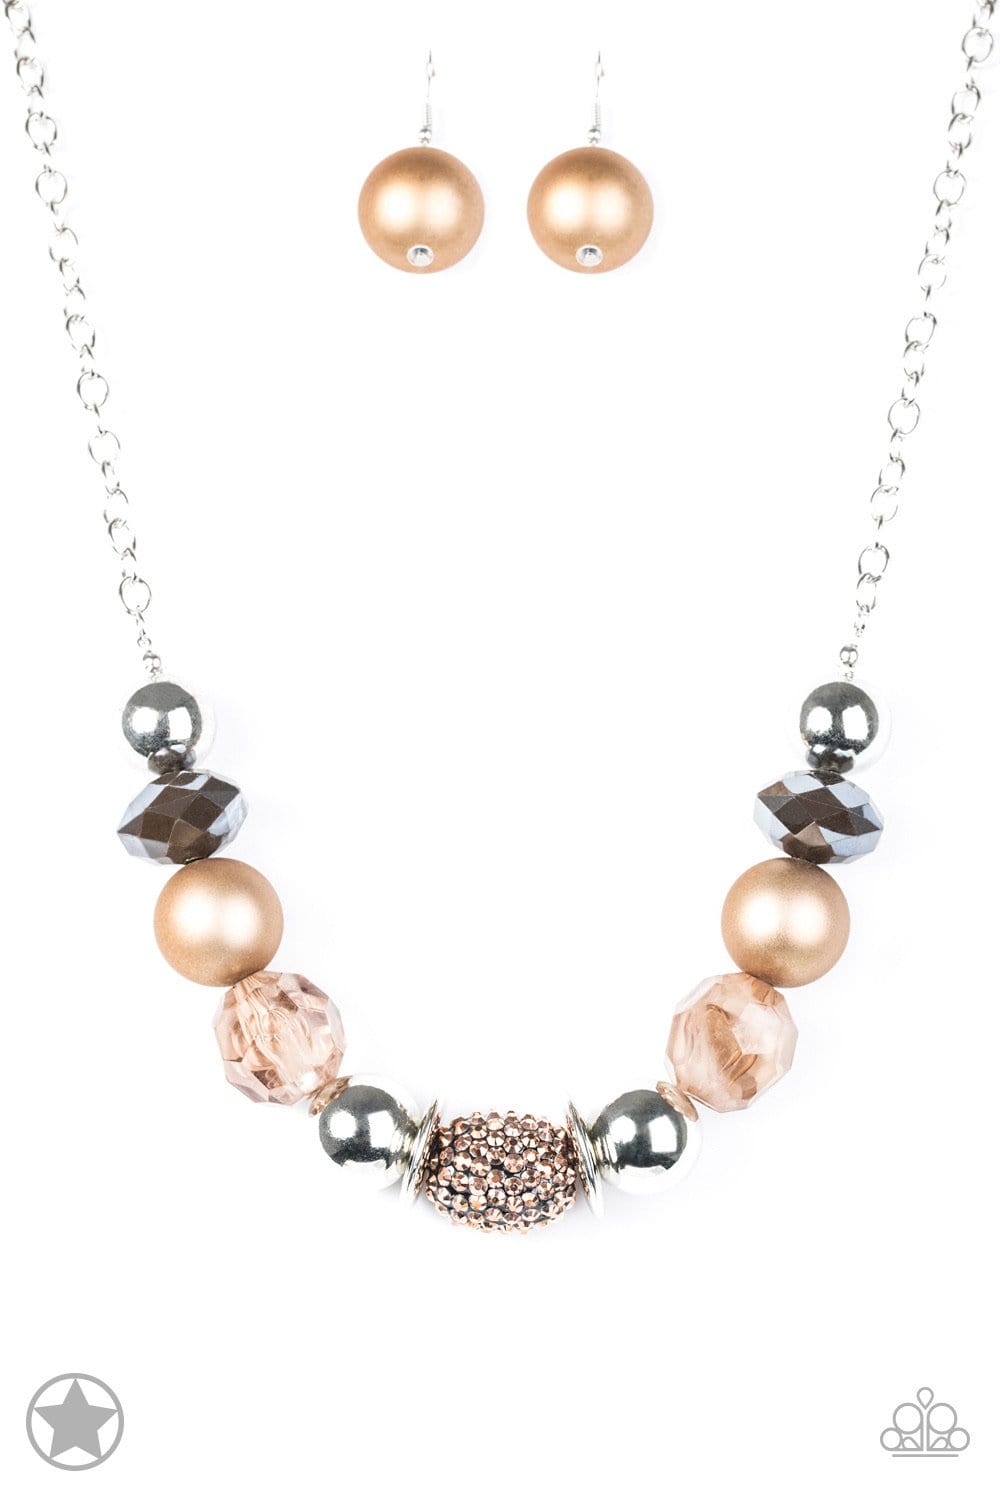 Paparazzi BLOCKBUSTERS: A Warm Welcome - Brown/Copper Necklace - Jewels N’ Thingz Boutique